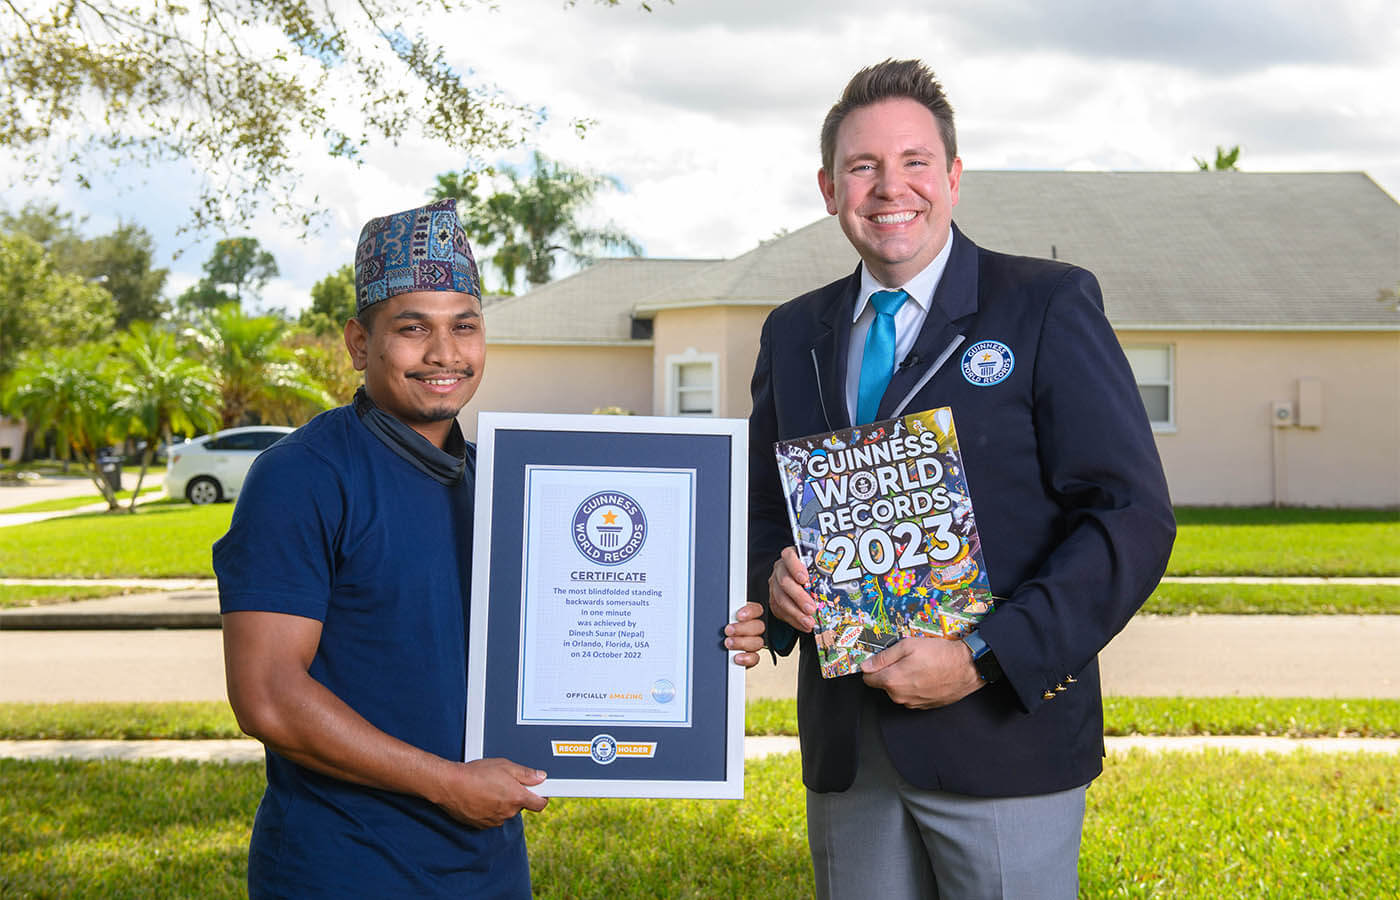 Record Breaker! Warface Claims a Guinness World Record